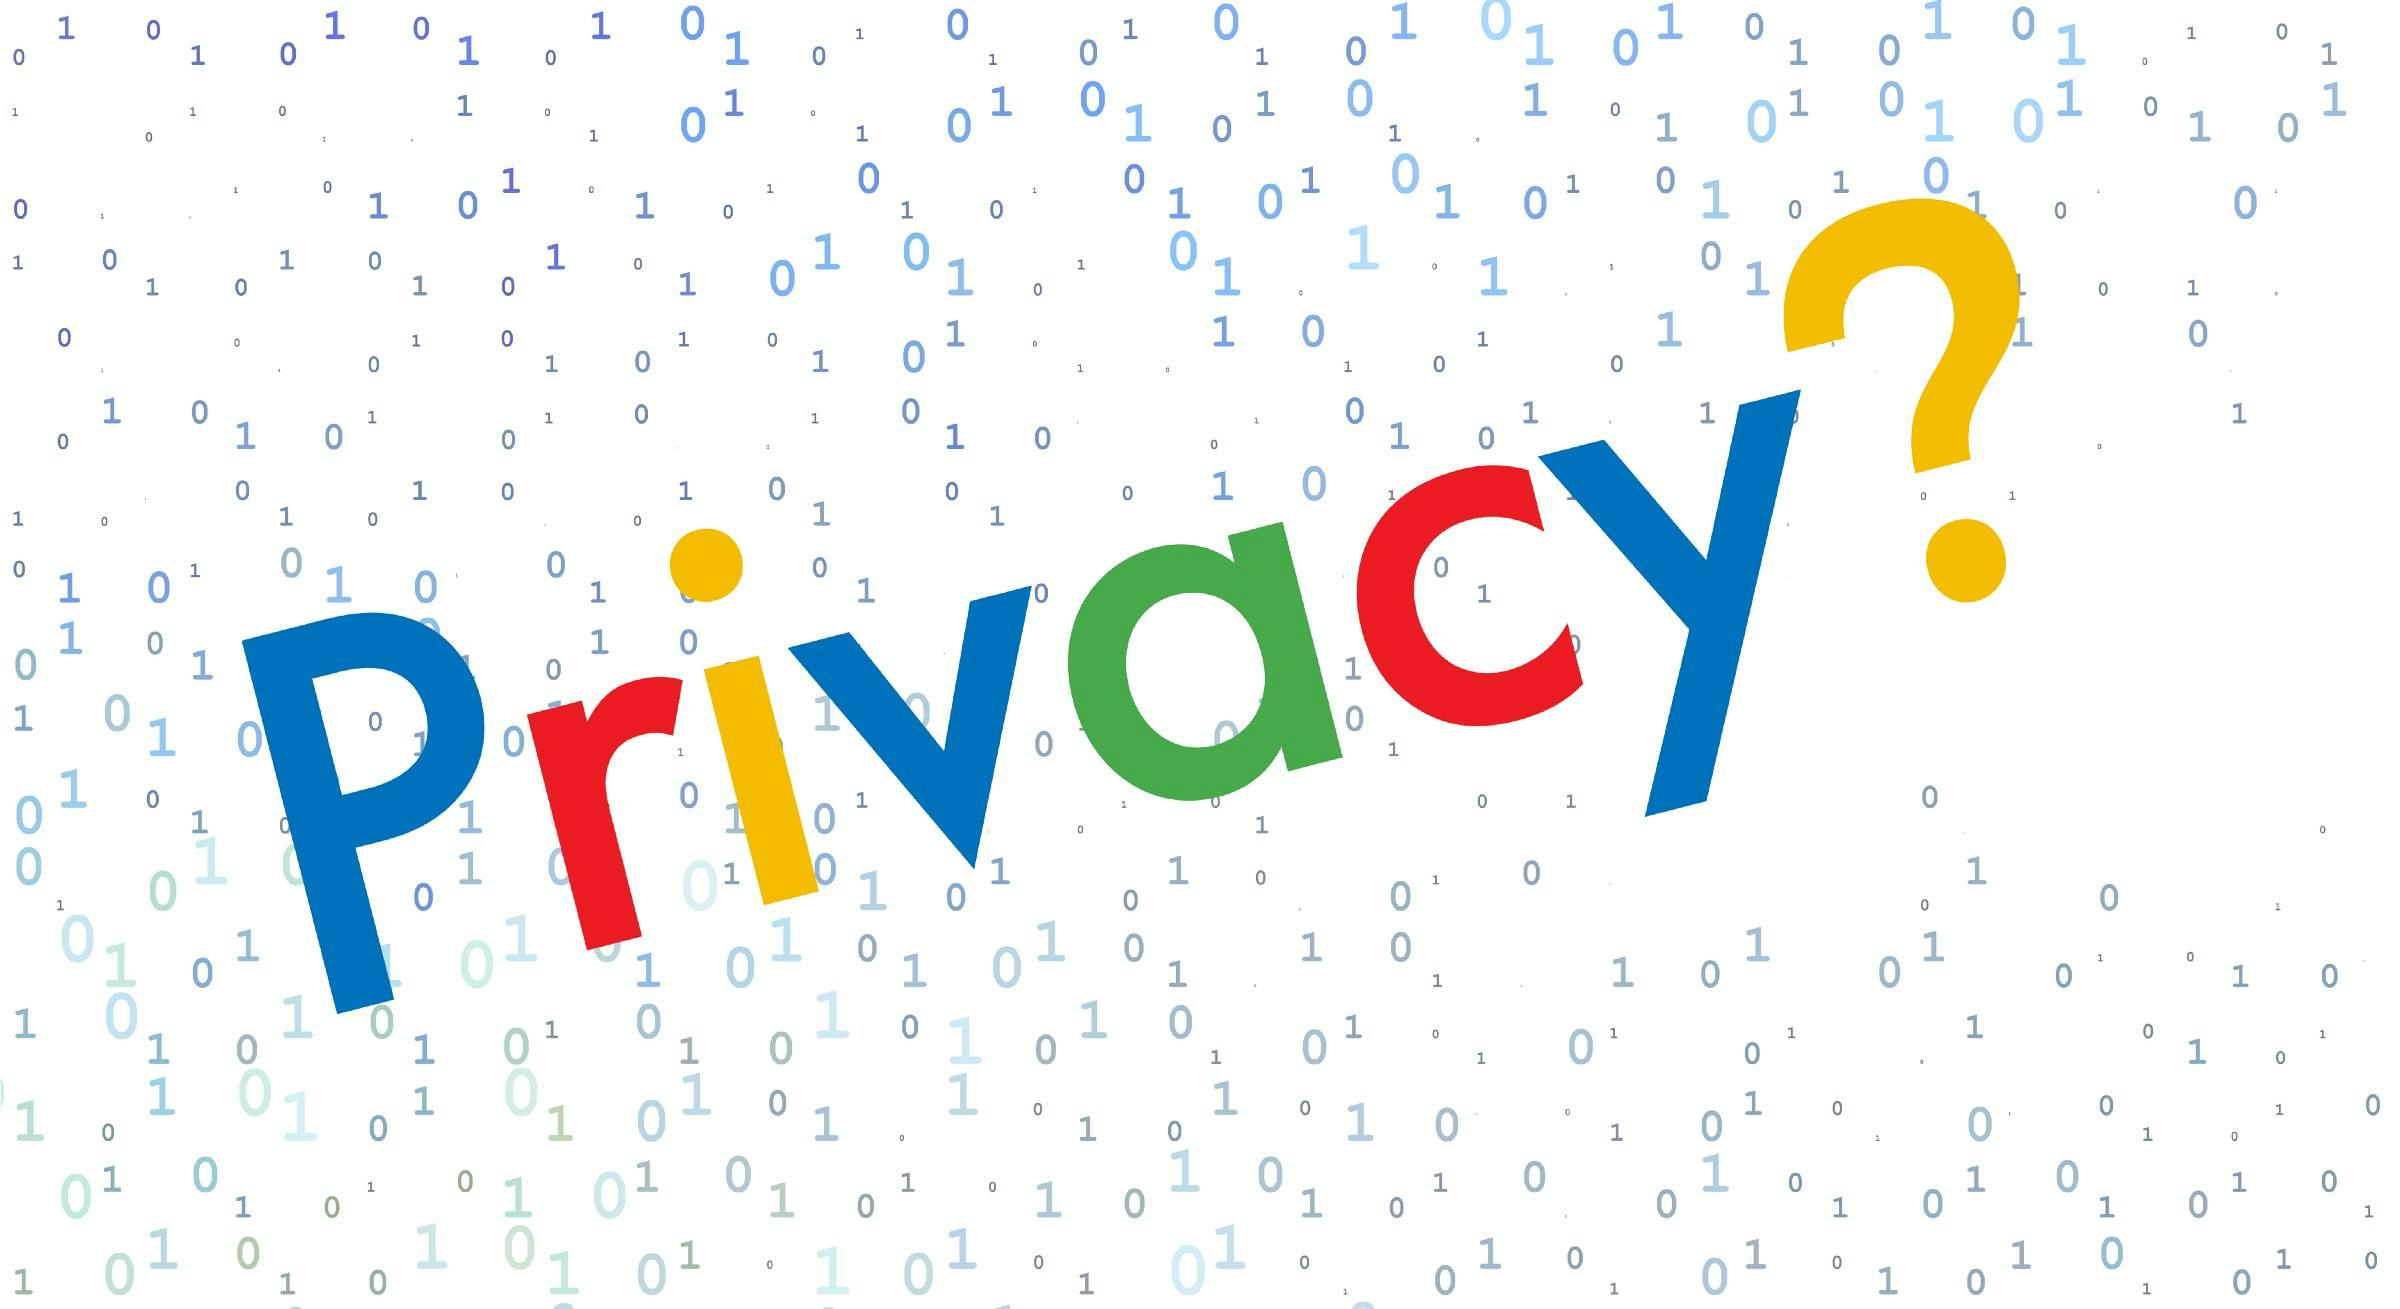 /data-privacy-concerns-with-google-b946f2b7afea feature image